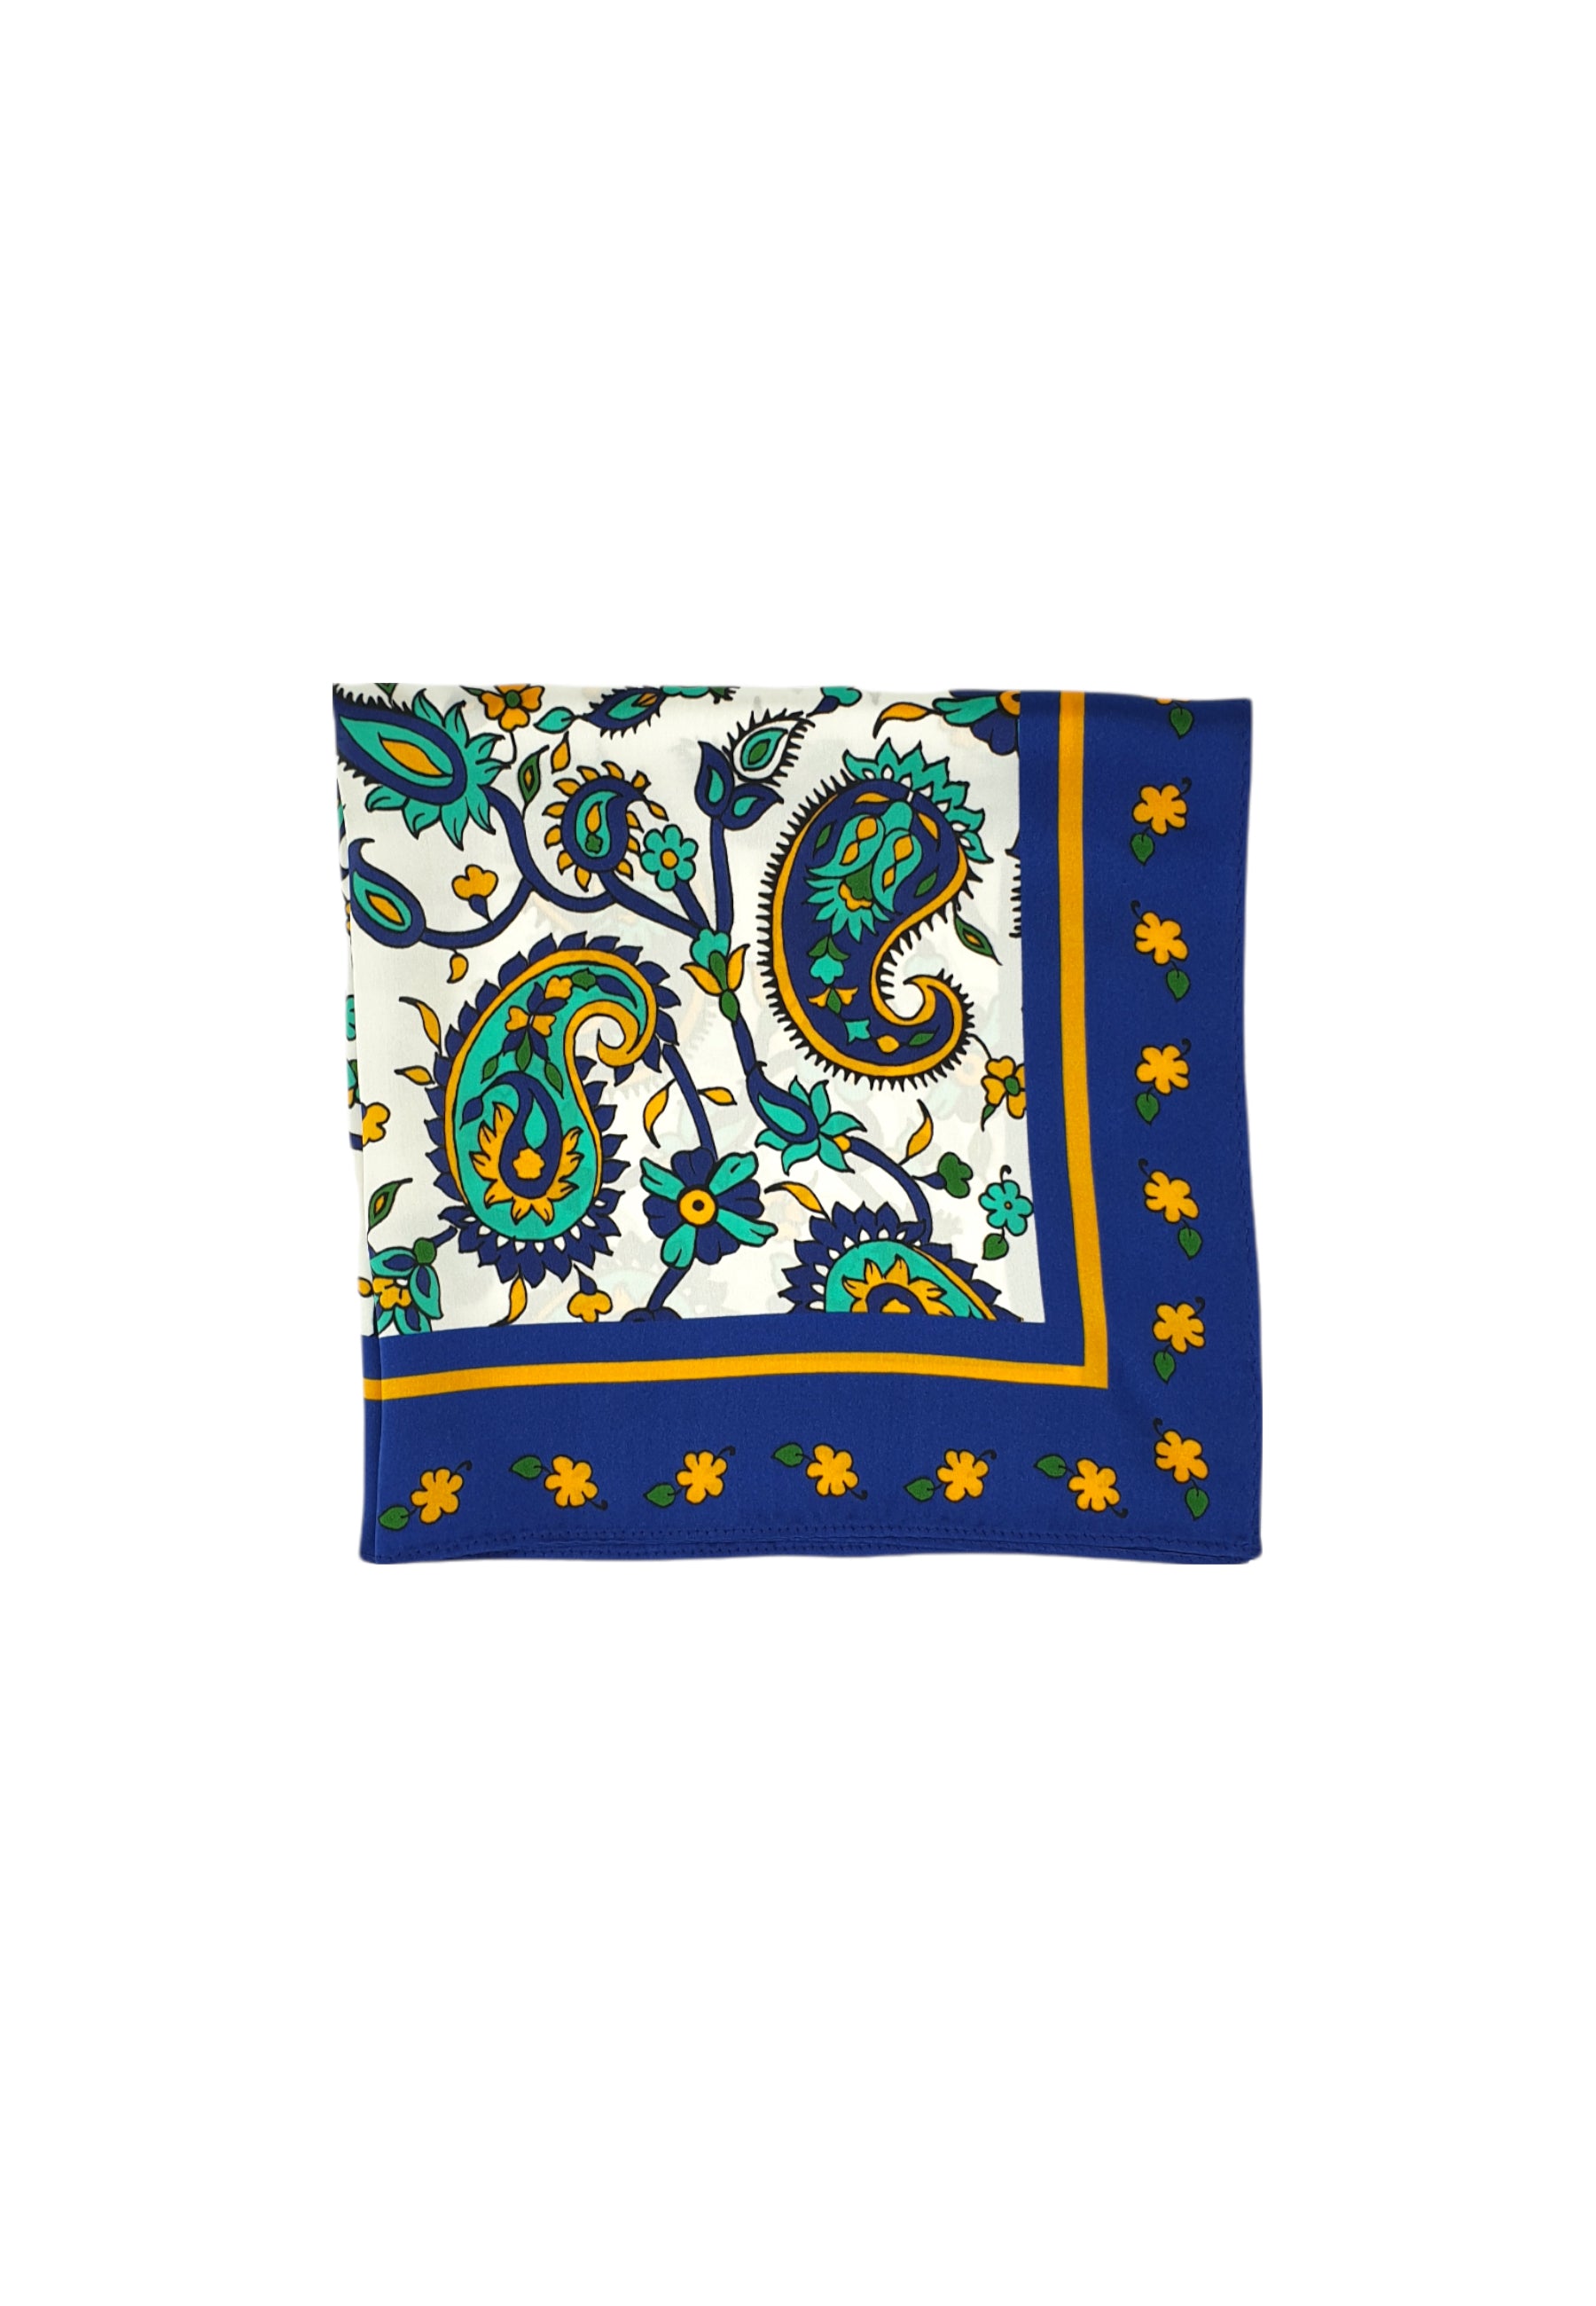 silk scarf paisley design - made in italy - persian style - sustainable fashion